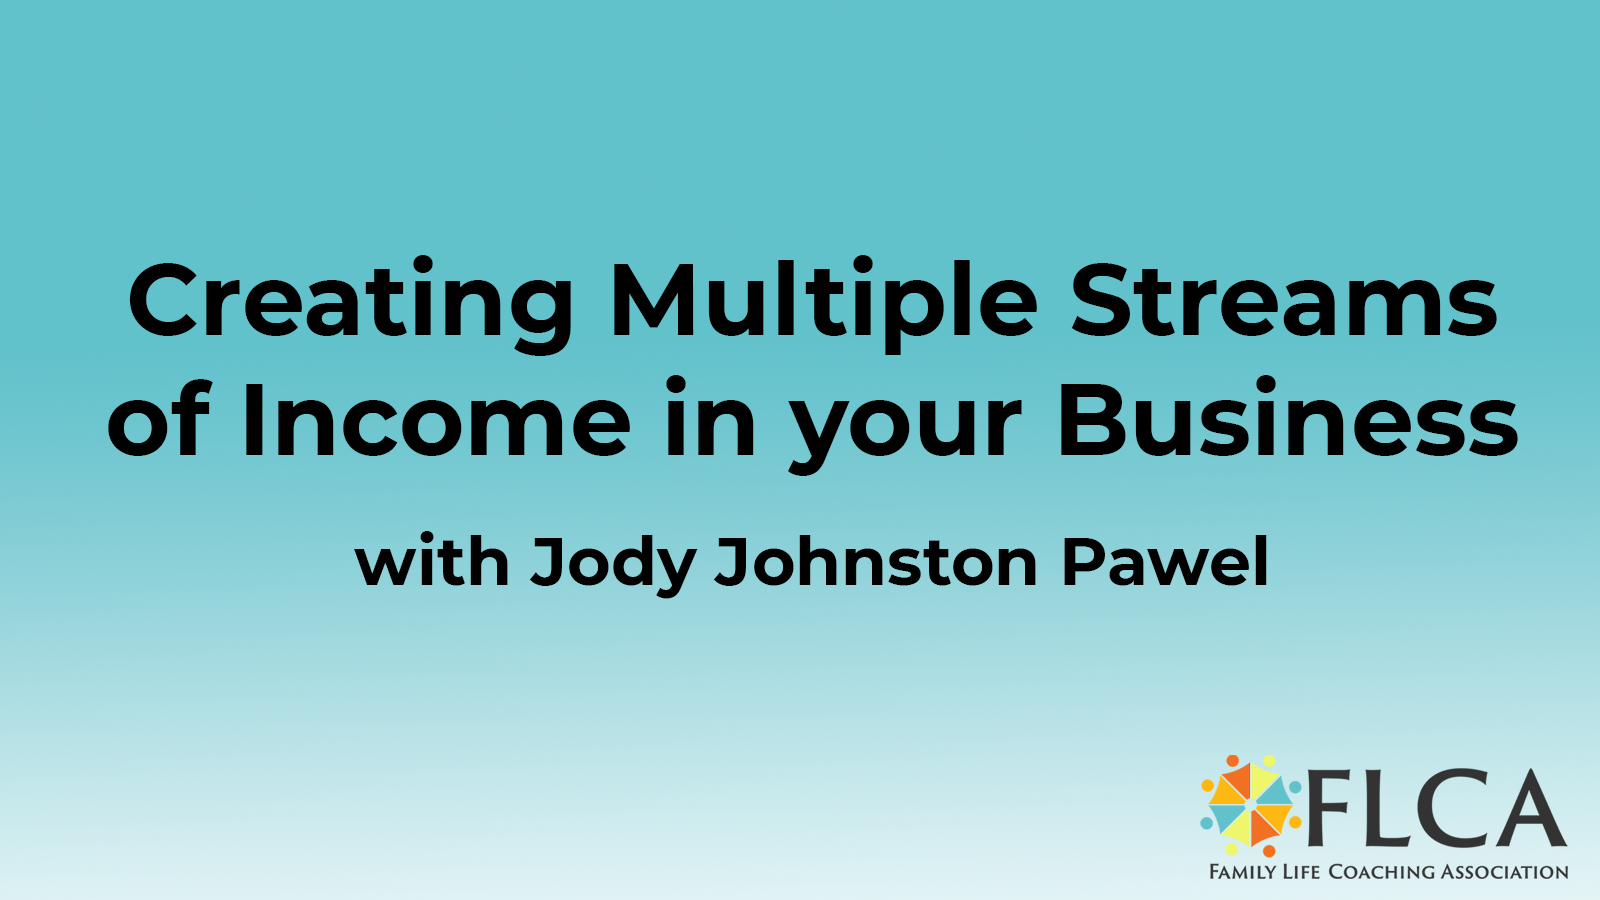 Creating Multiple Streams of Income in your Business